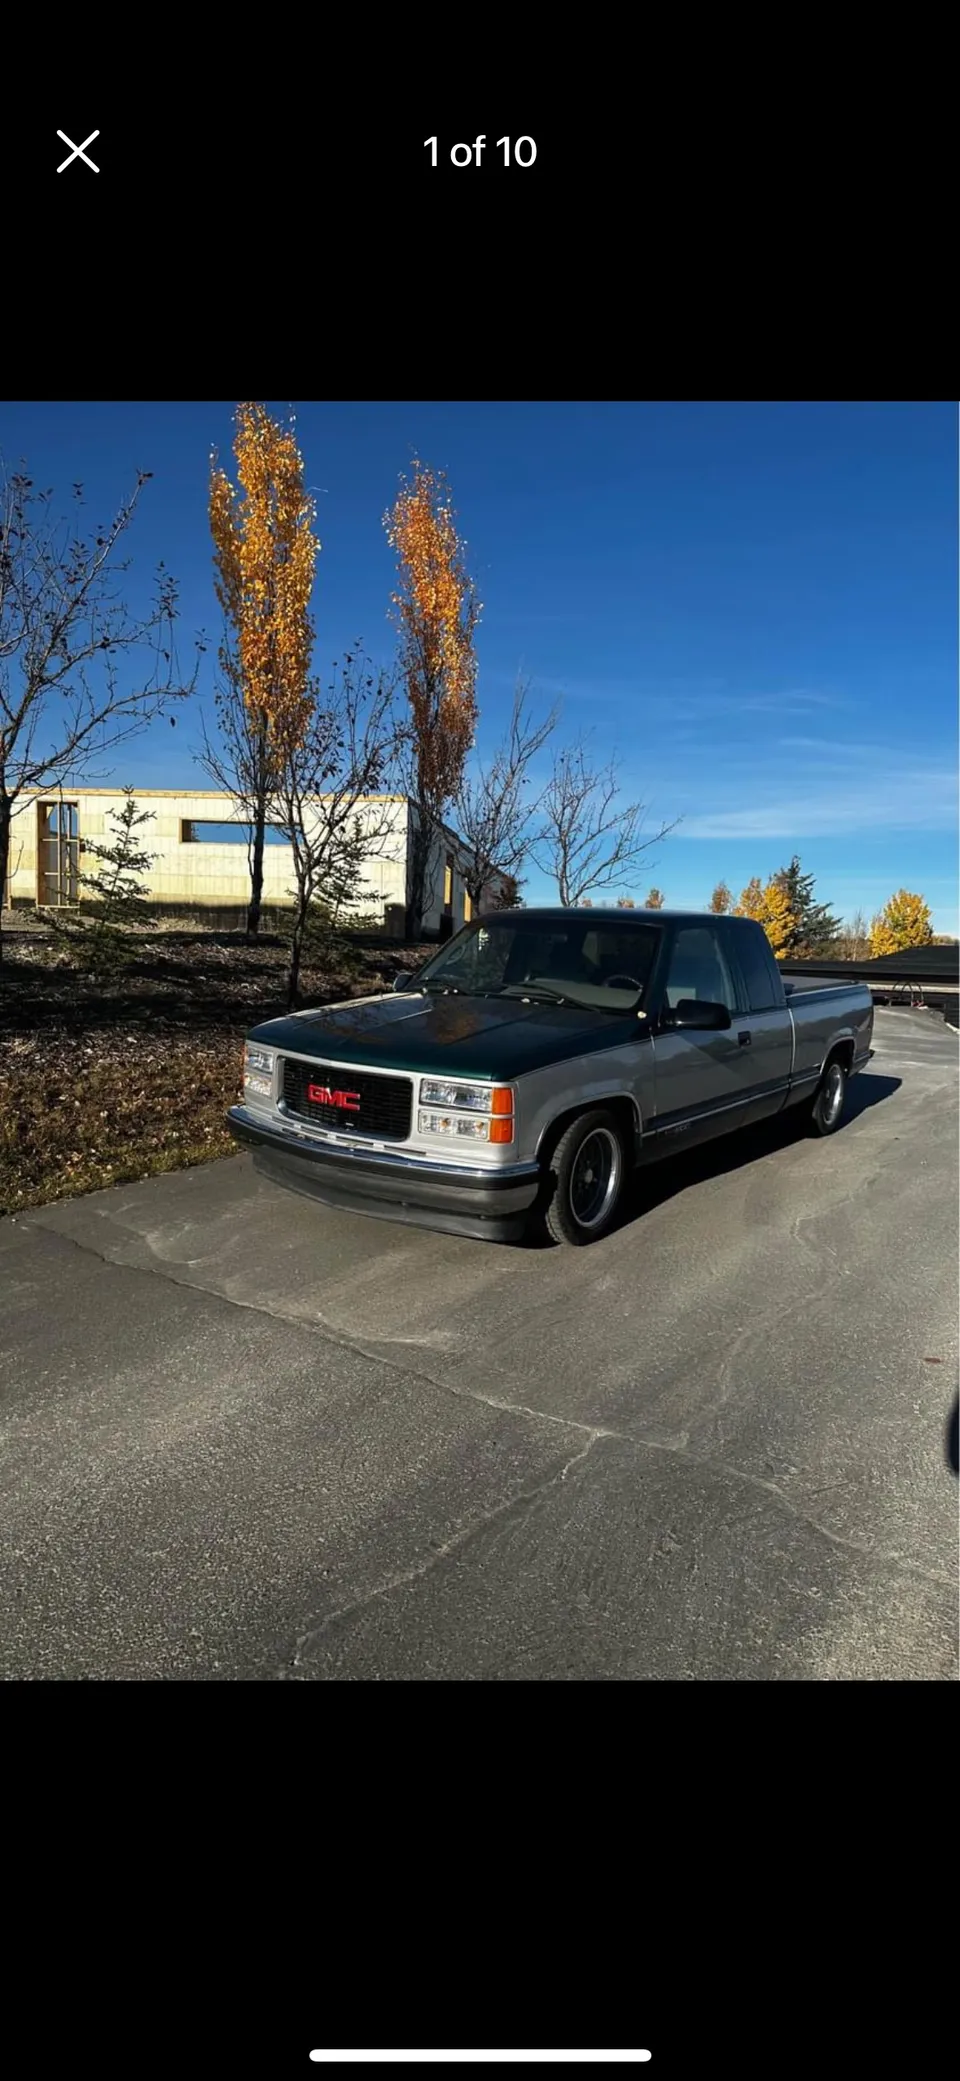 Immaculate, 1995 gmc extended cab, short box